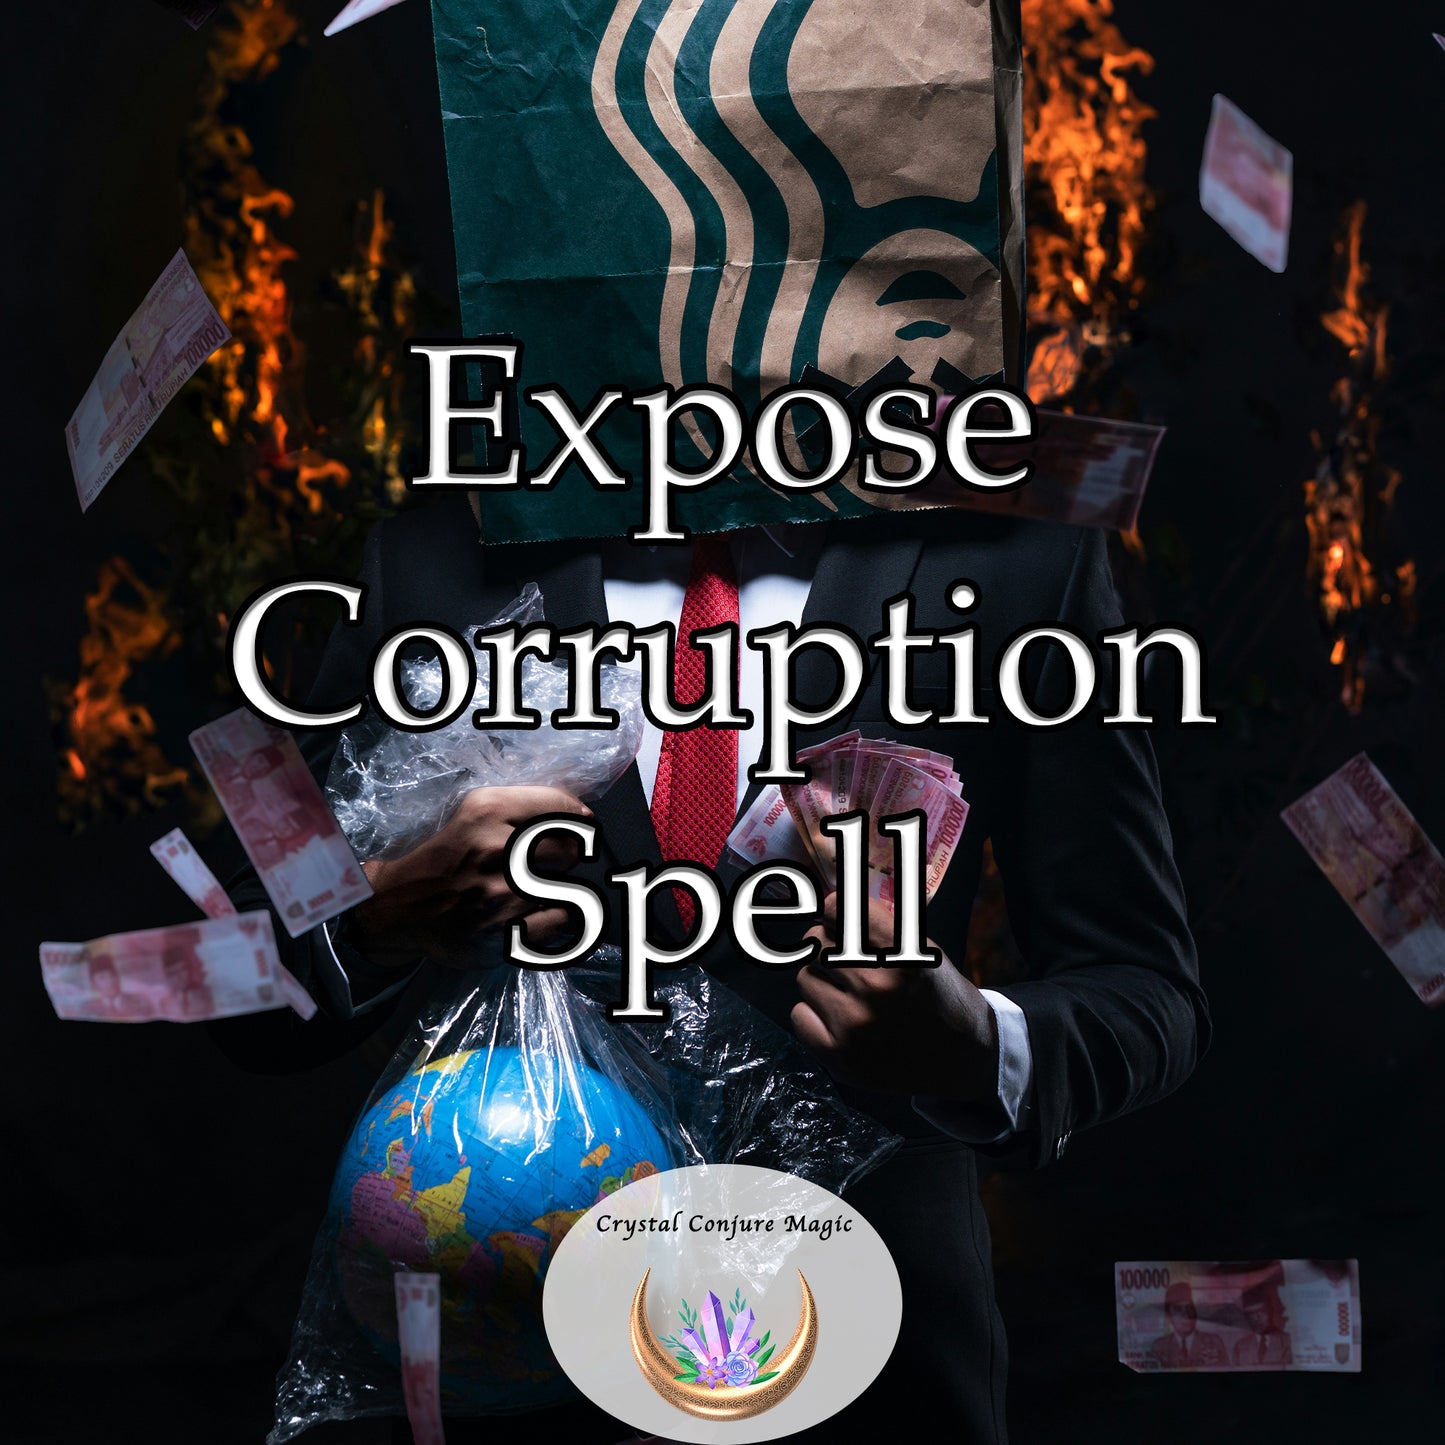 Expose Corruption Spell - reveal hidden malice and underhanded dealings